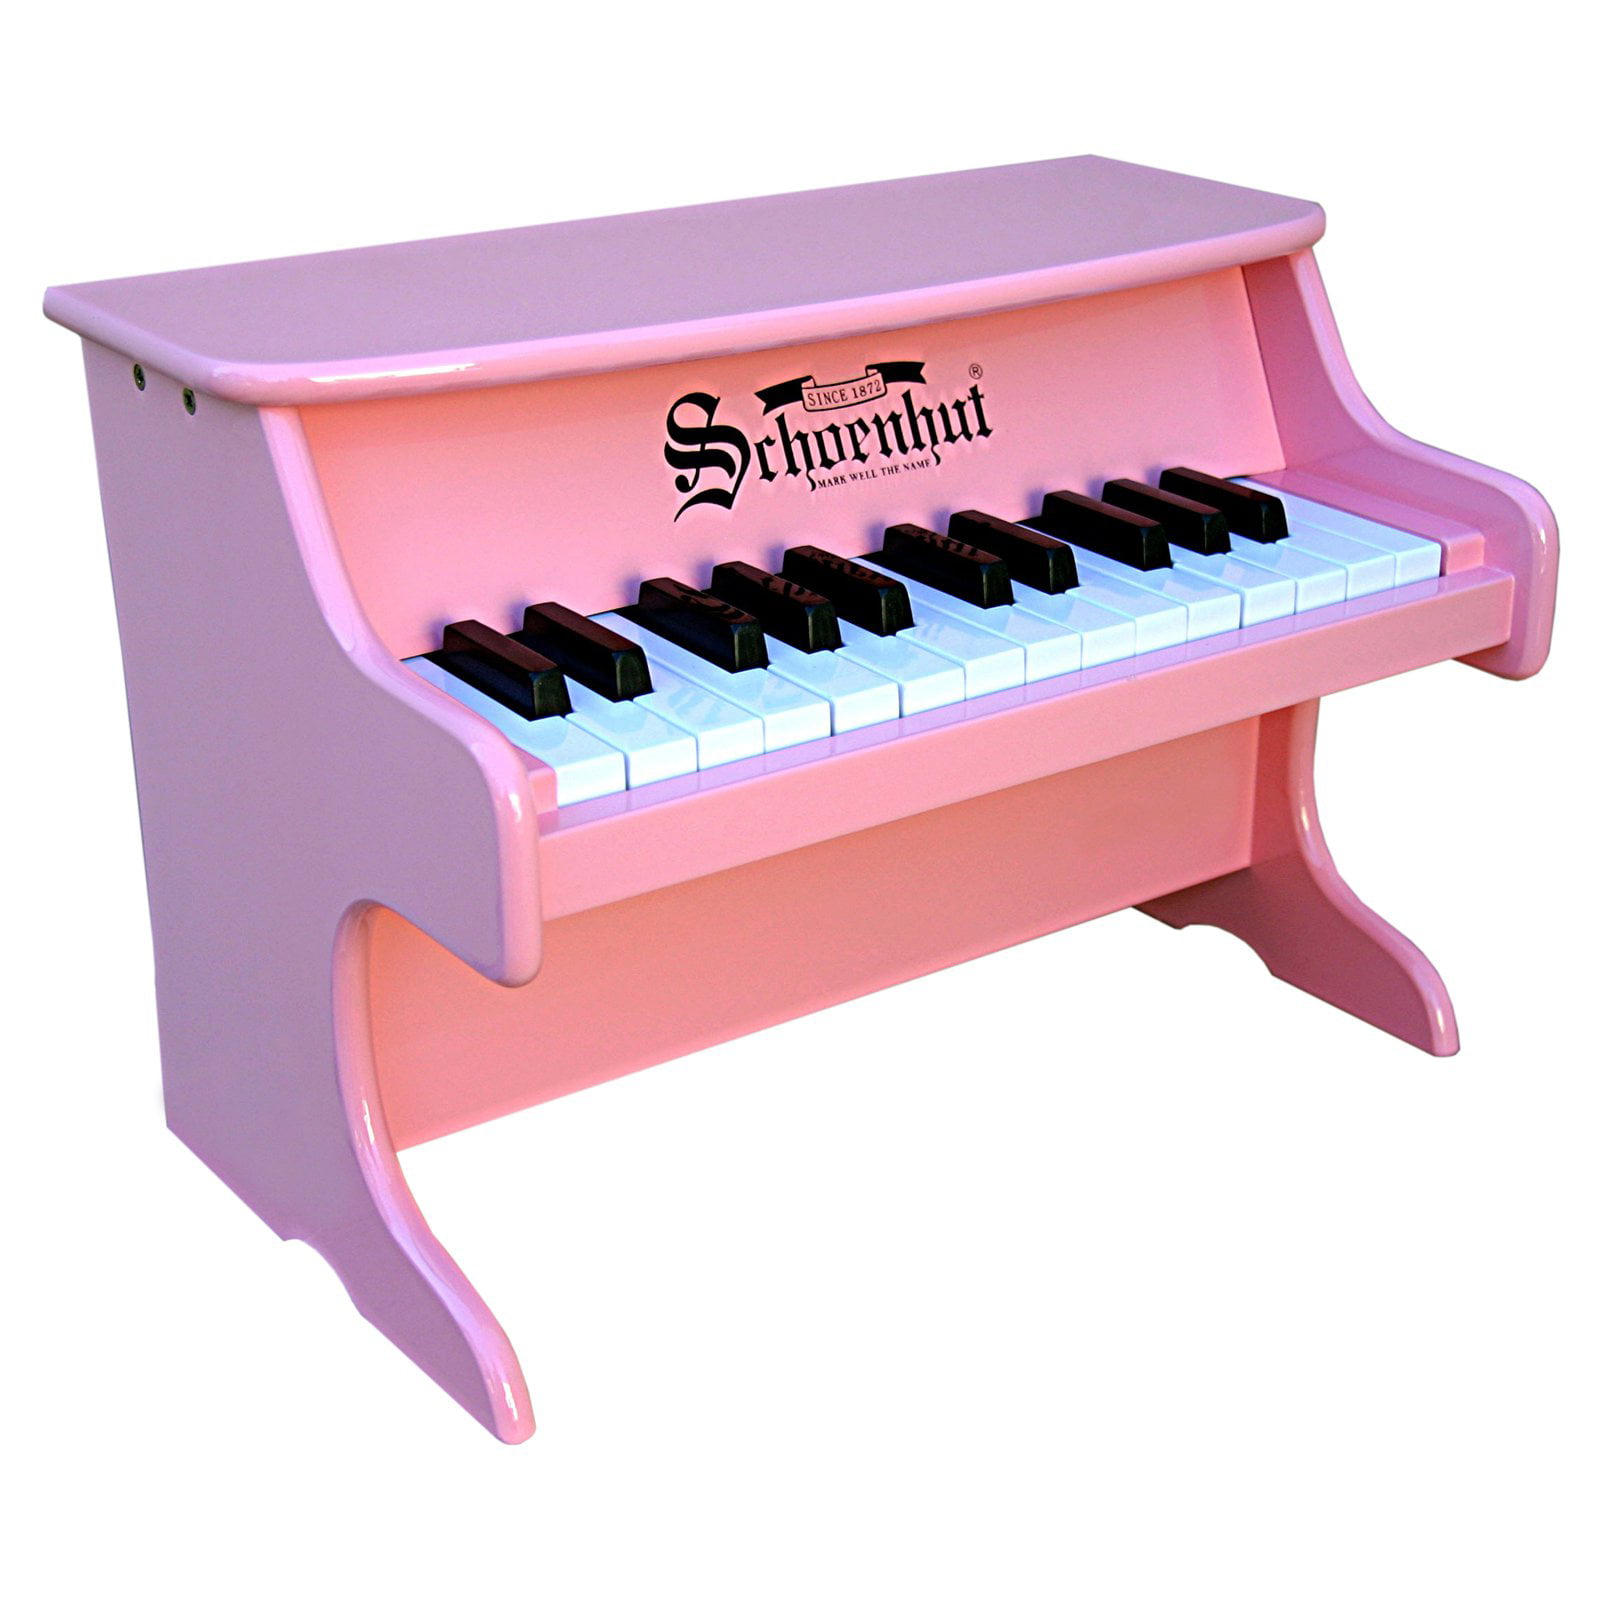 schylling mini red piano